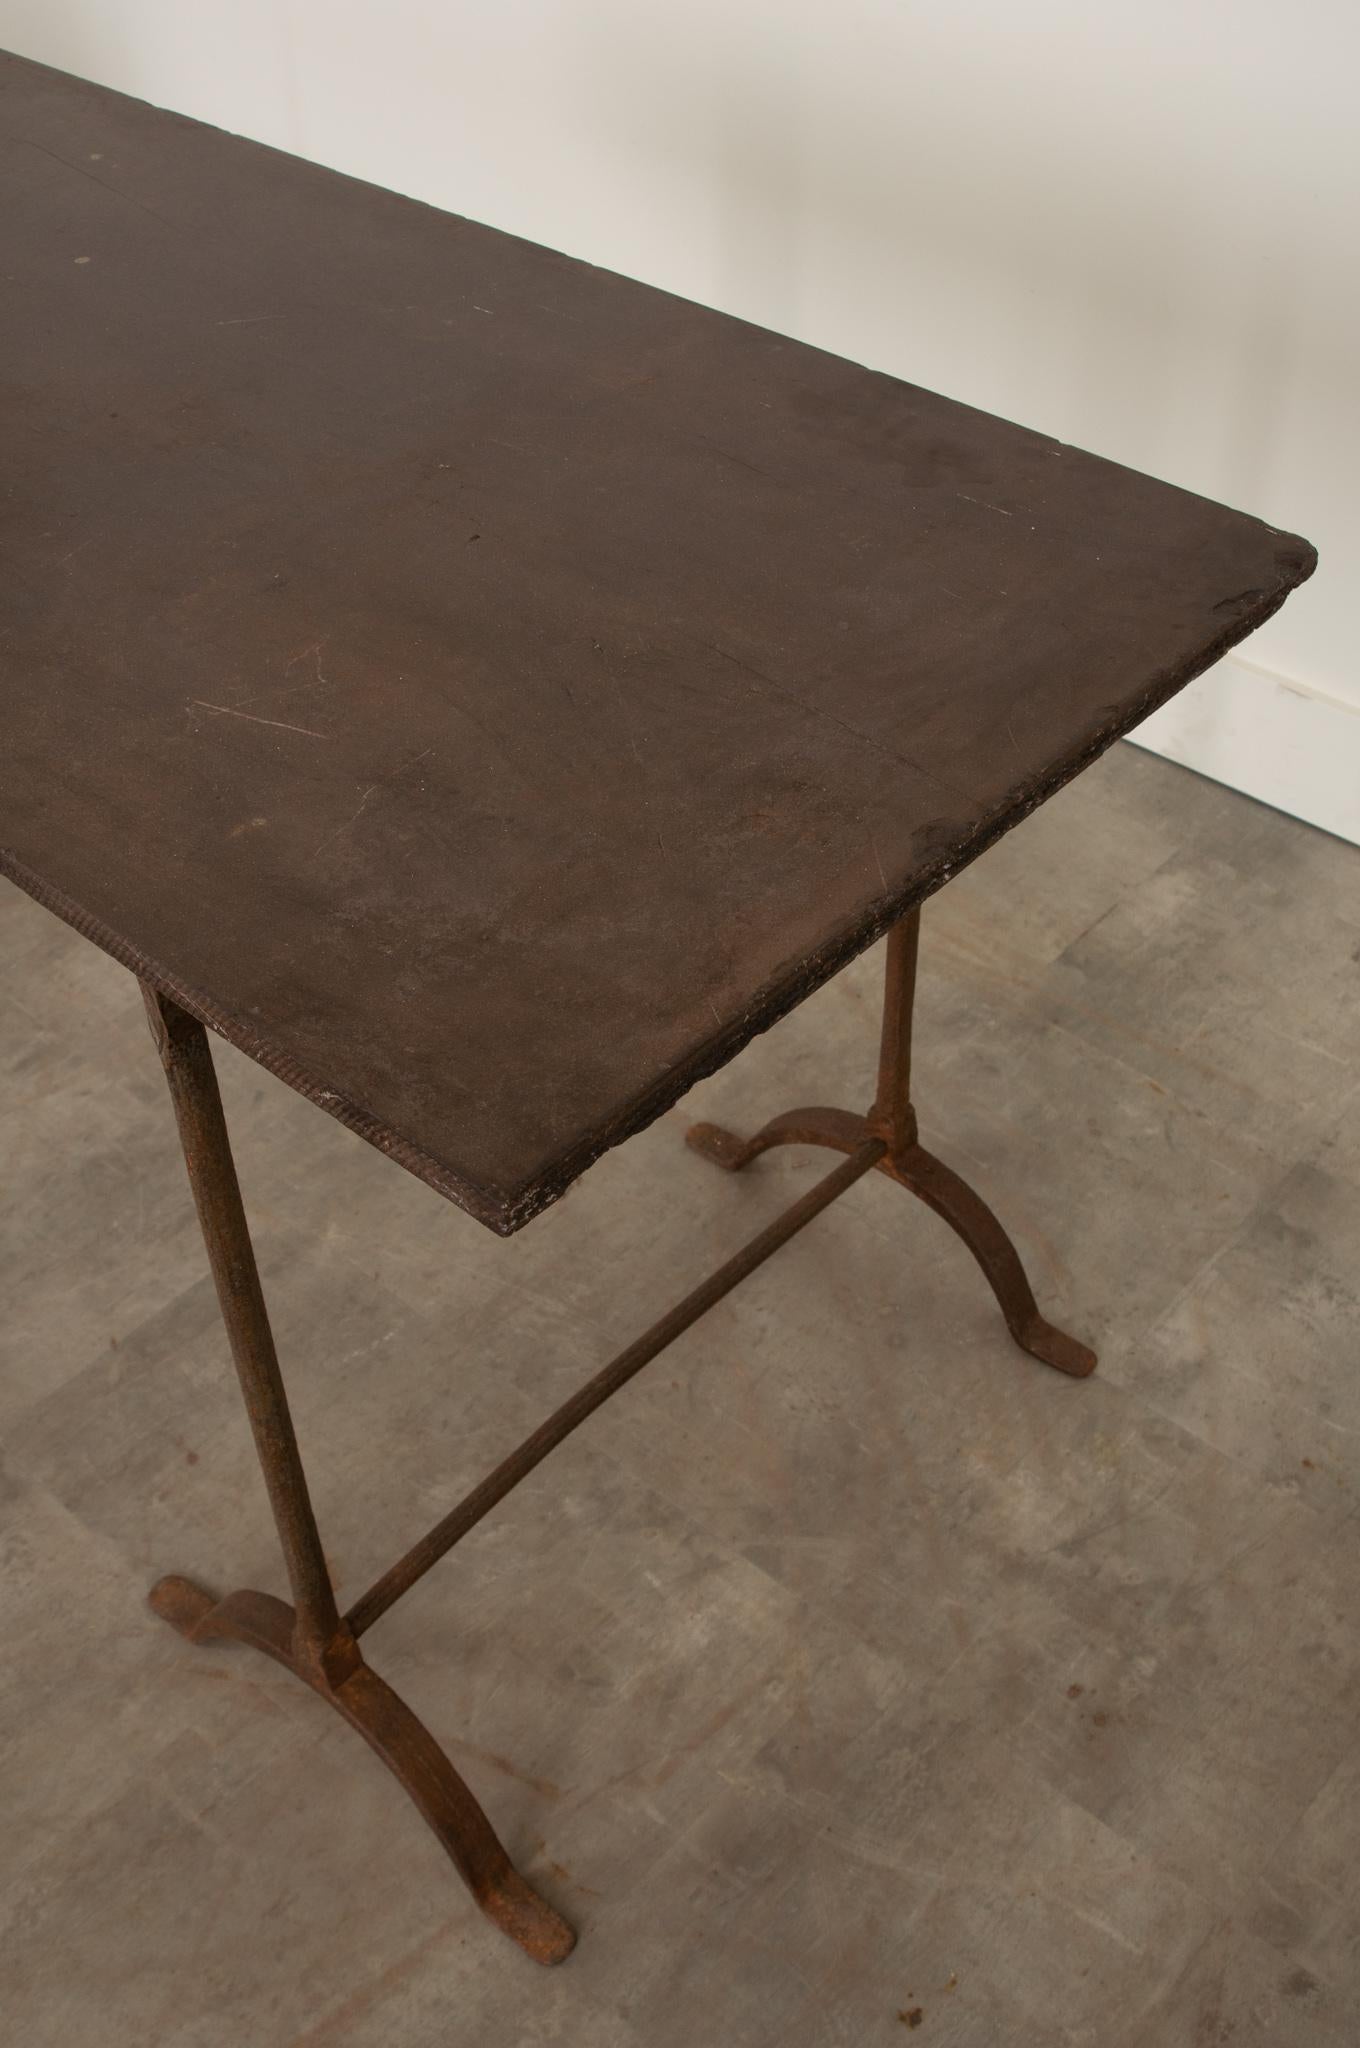 English 19th Century Iron & Slate Work Table In Good Condition For Sale In Baton Rouge, LA